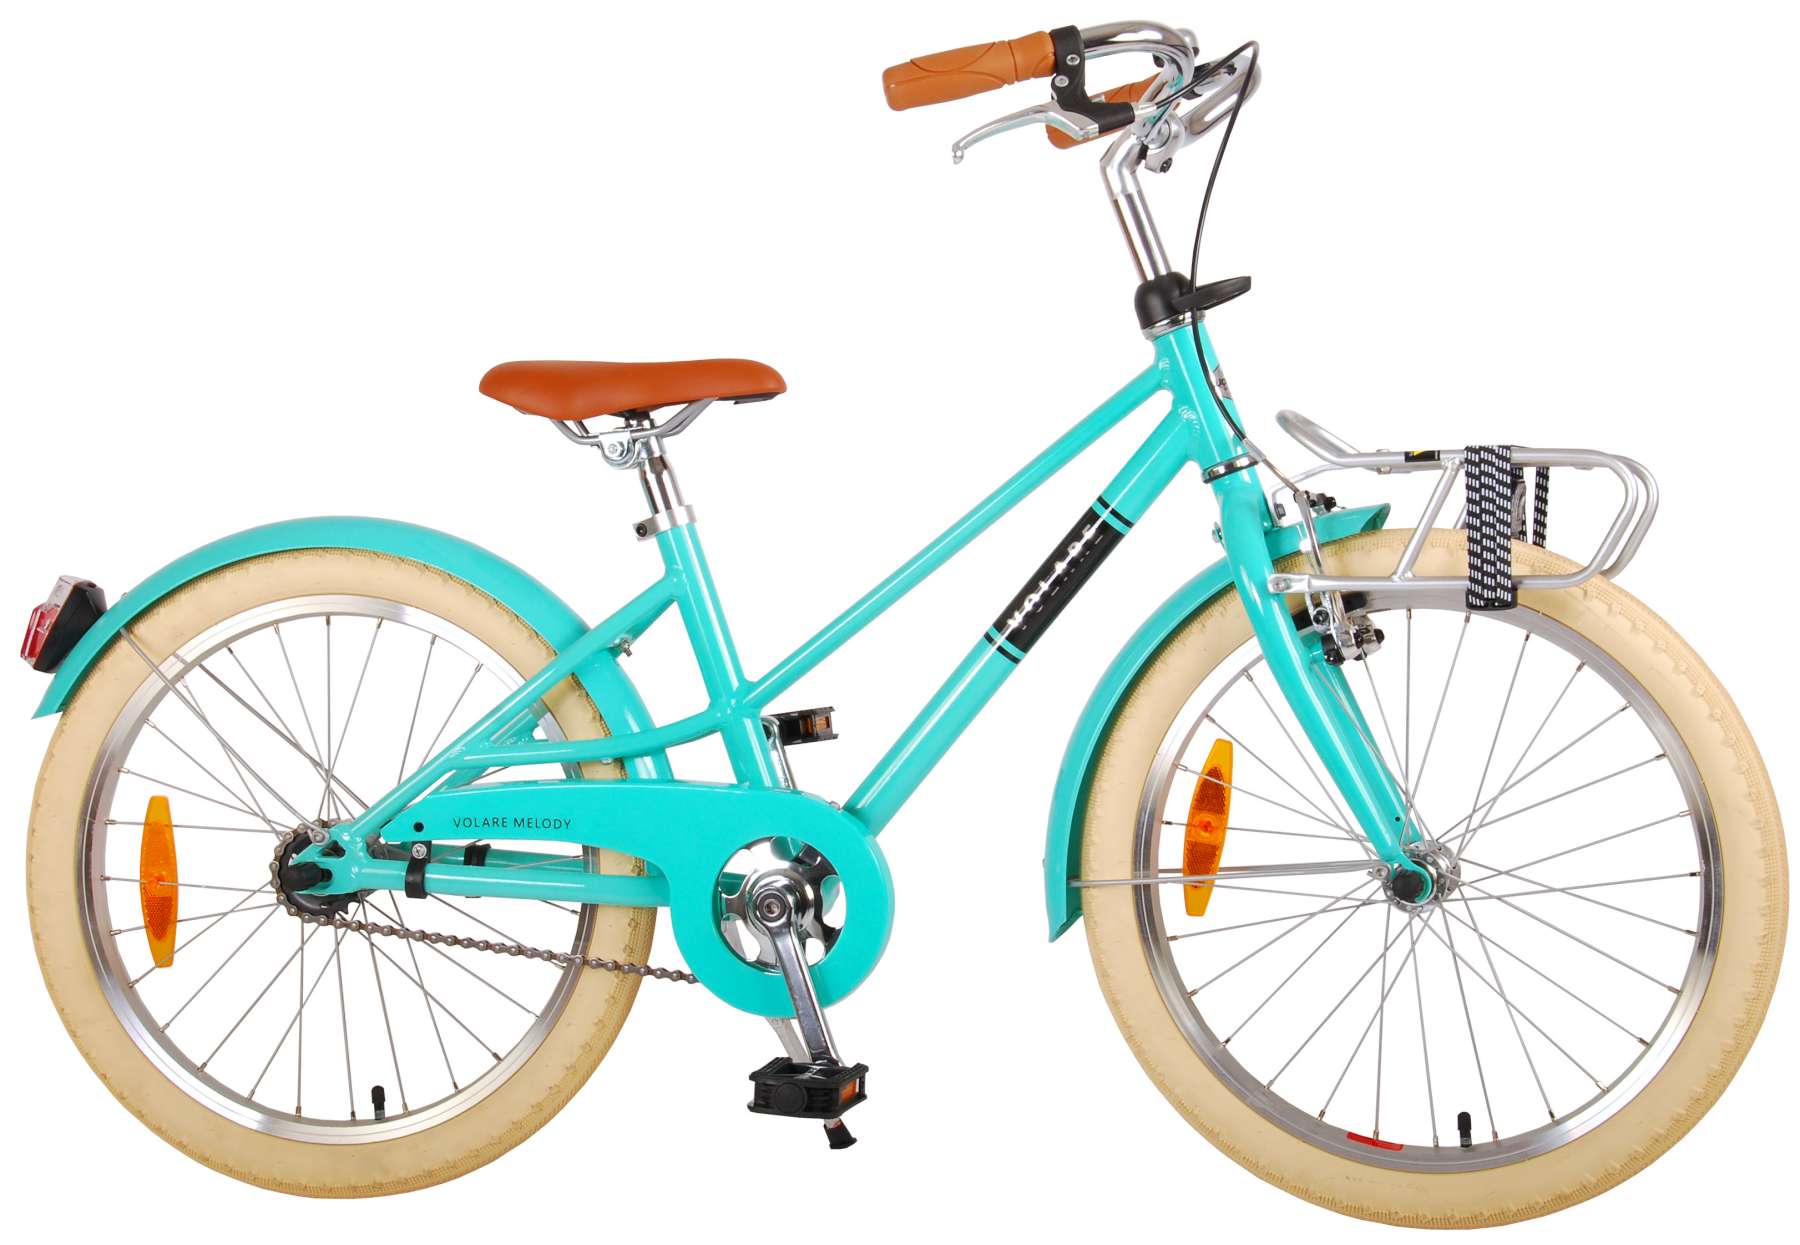 Wennen aan Moet Transistor Volare Melody Kinderfiets - Meisjes - 20 inch - Turquoise - Prime Collection